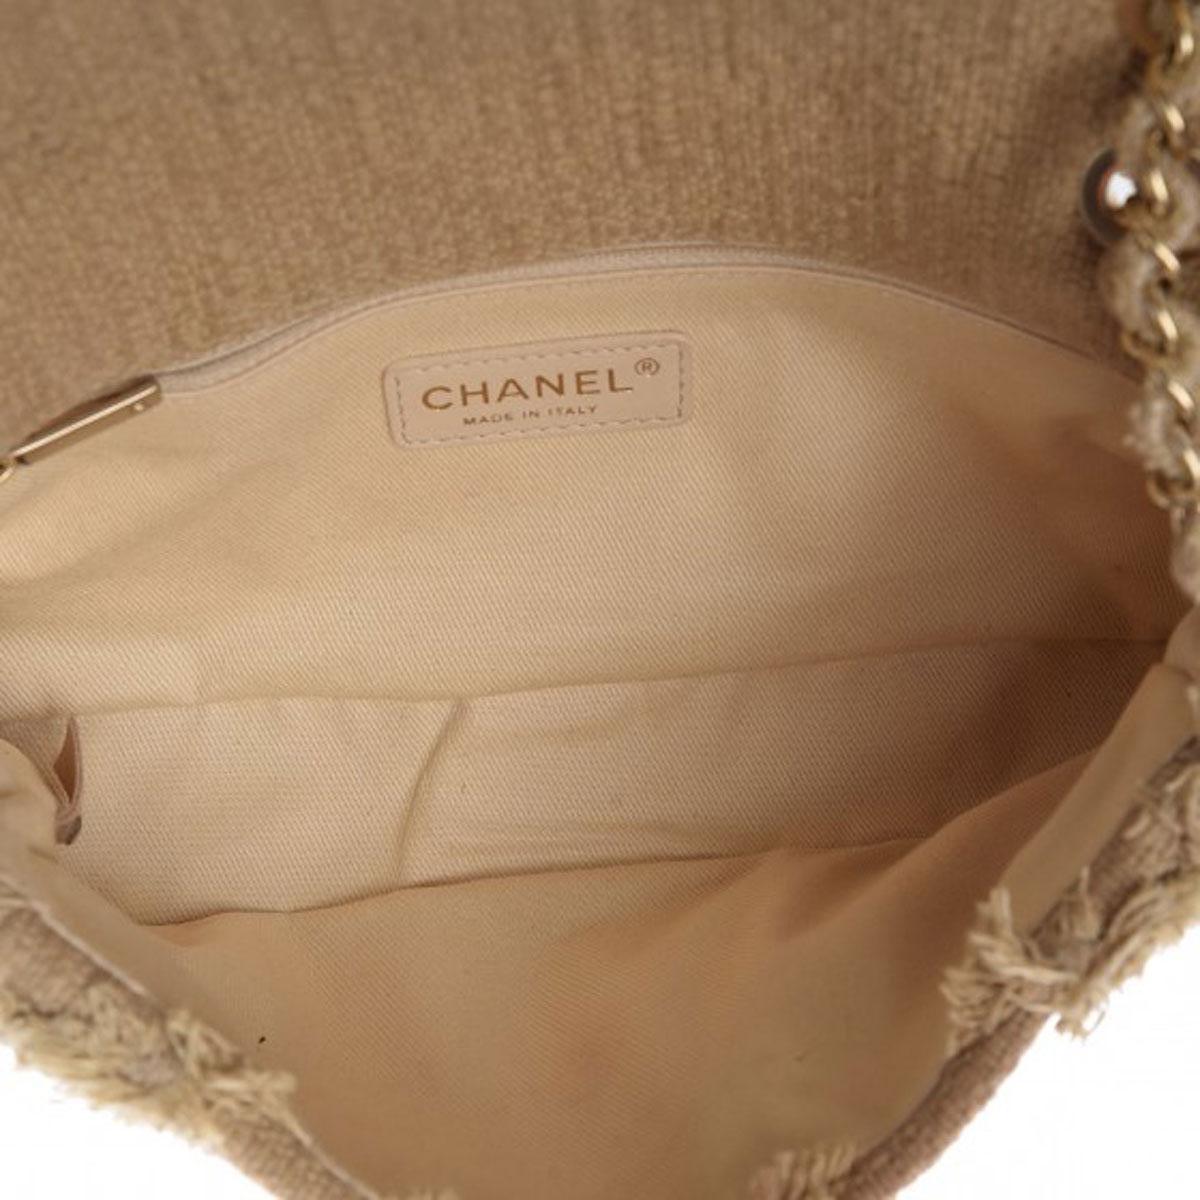 Chanel 2009 Small Sized Beige Tweed Fringe Organic Crochet Nature Flap Bag For Sale 8